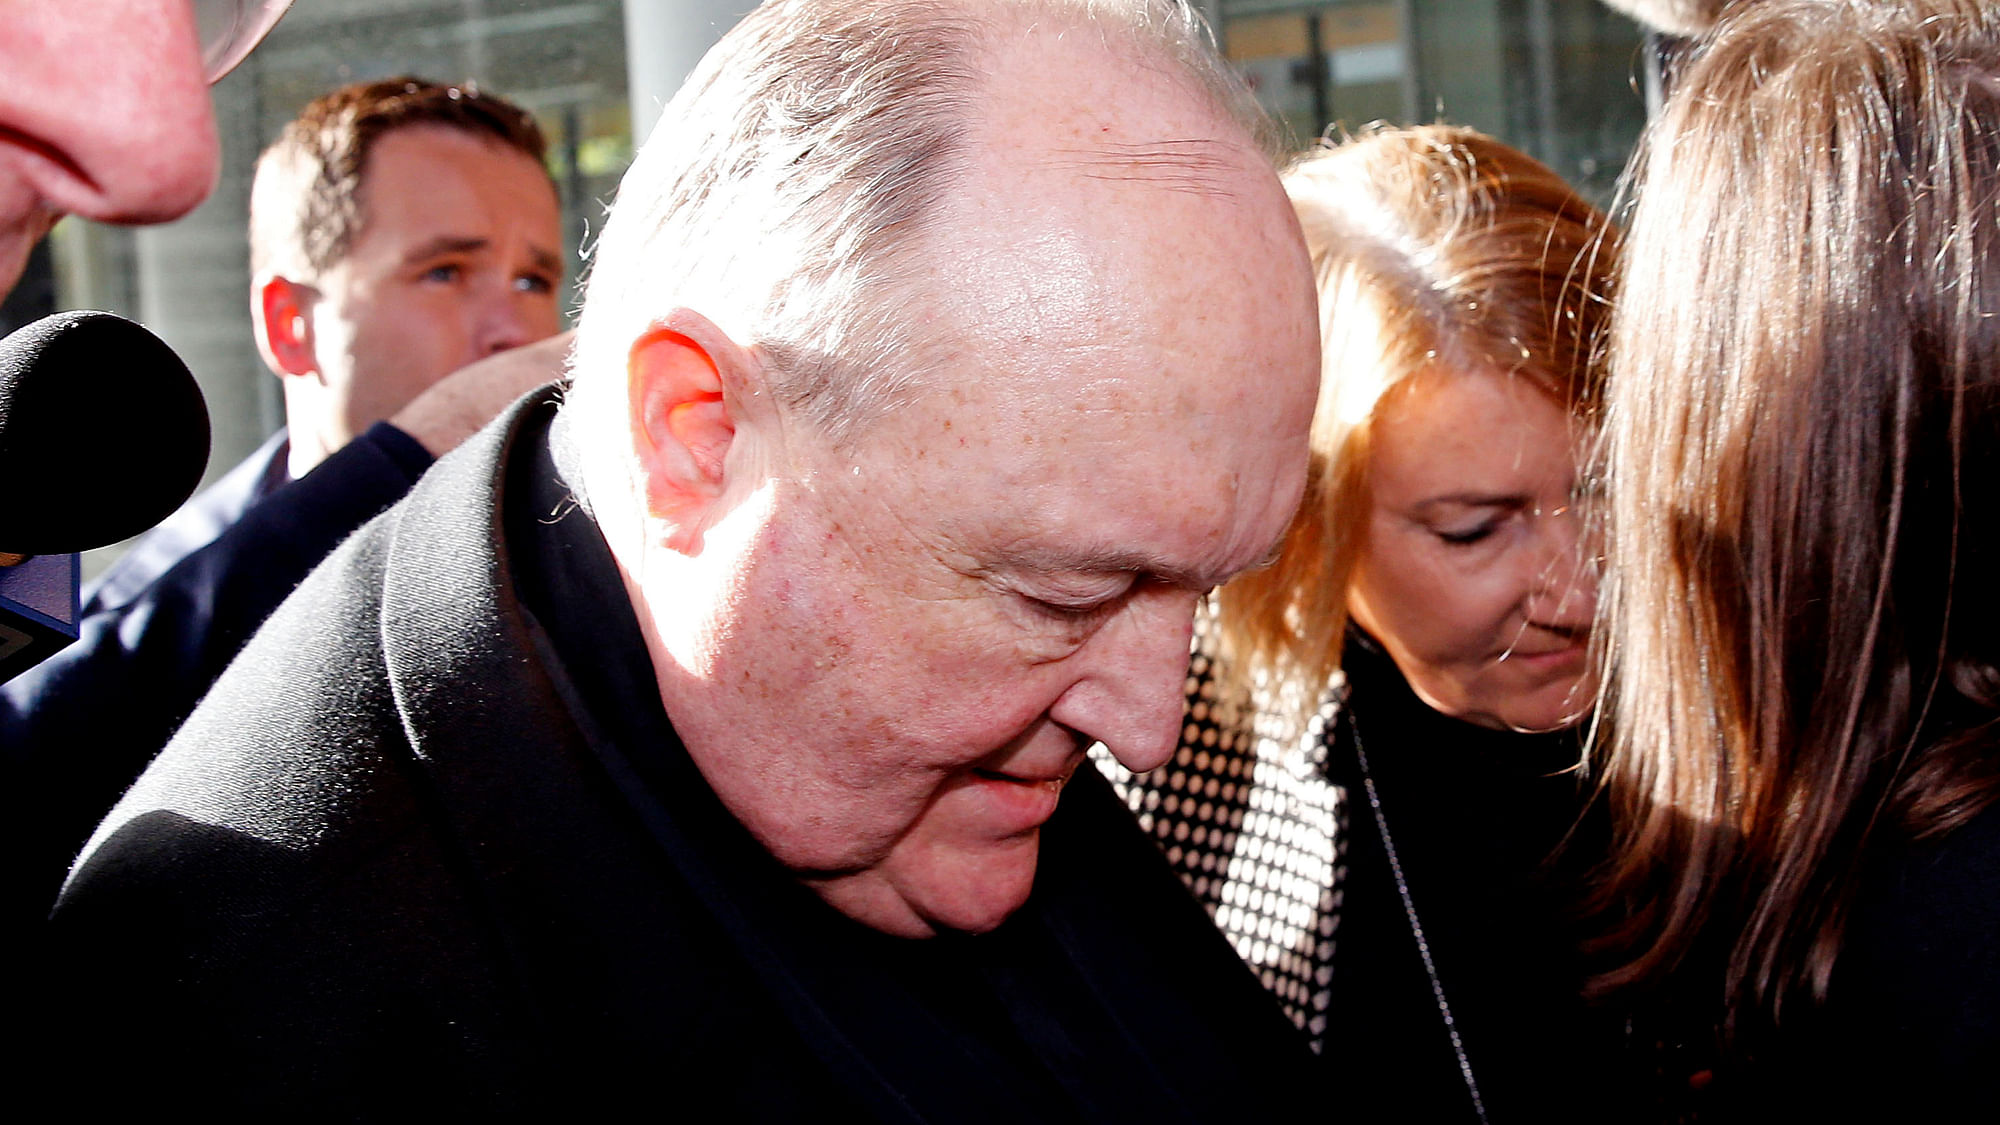 Philip Wilson, the most senior Roman Catholic cleric in the world to be convicted of covering up child sex abuse, was sentenced to 12 months in detention. 